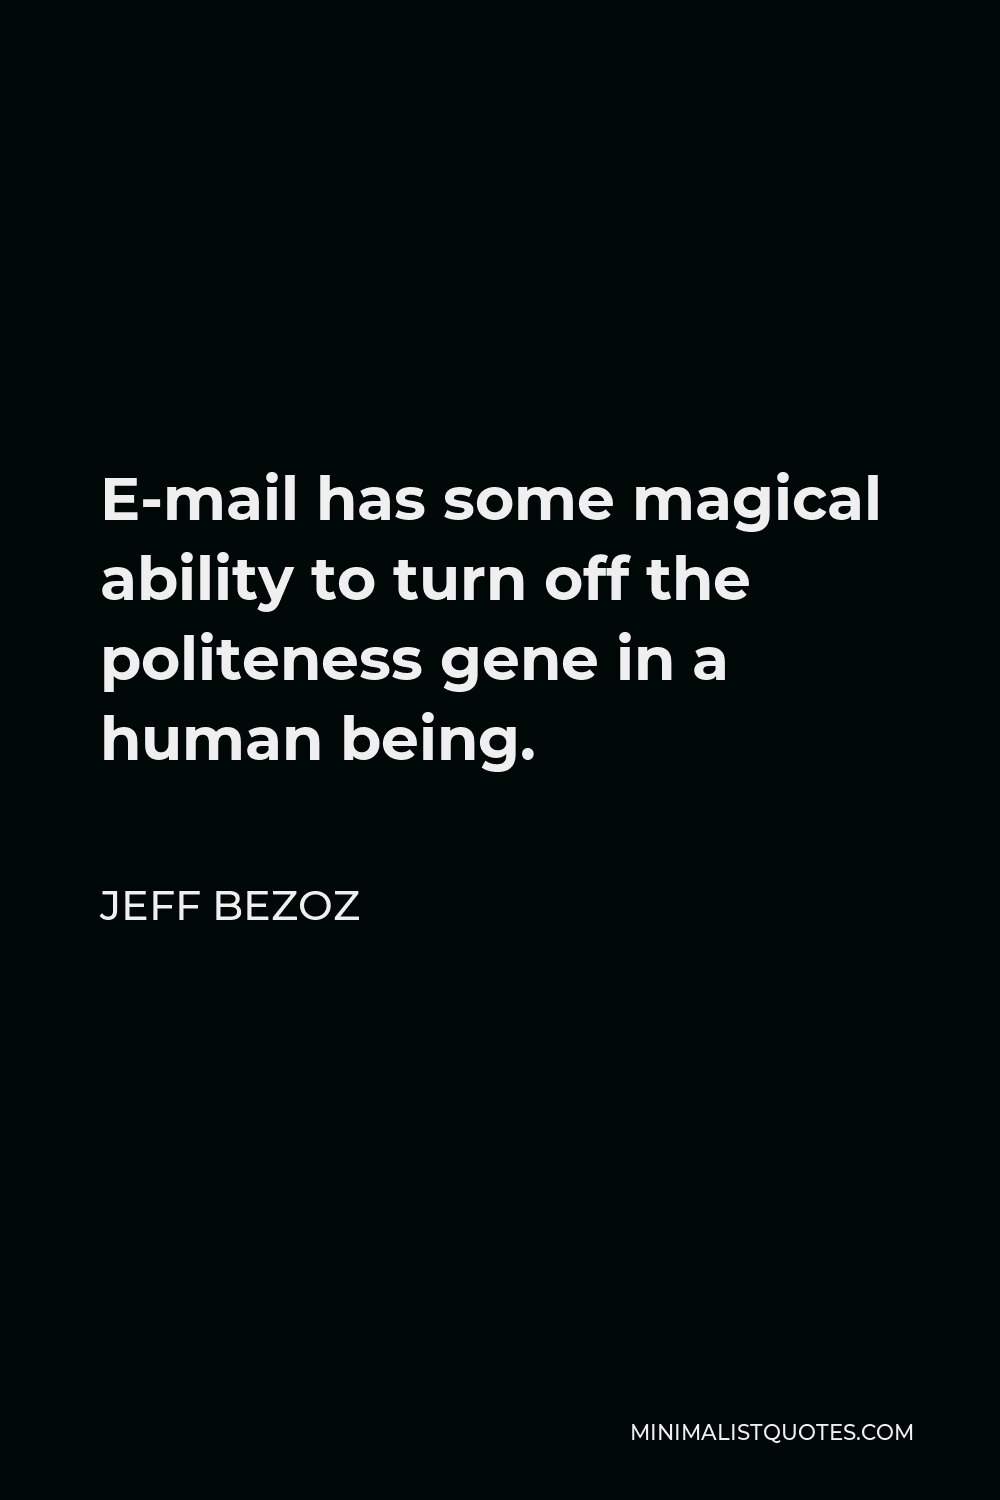 Jeff Bezoz Quote - E-mail has some magical ability to turn off the politeness gene in a human being.